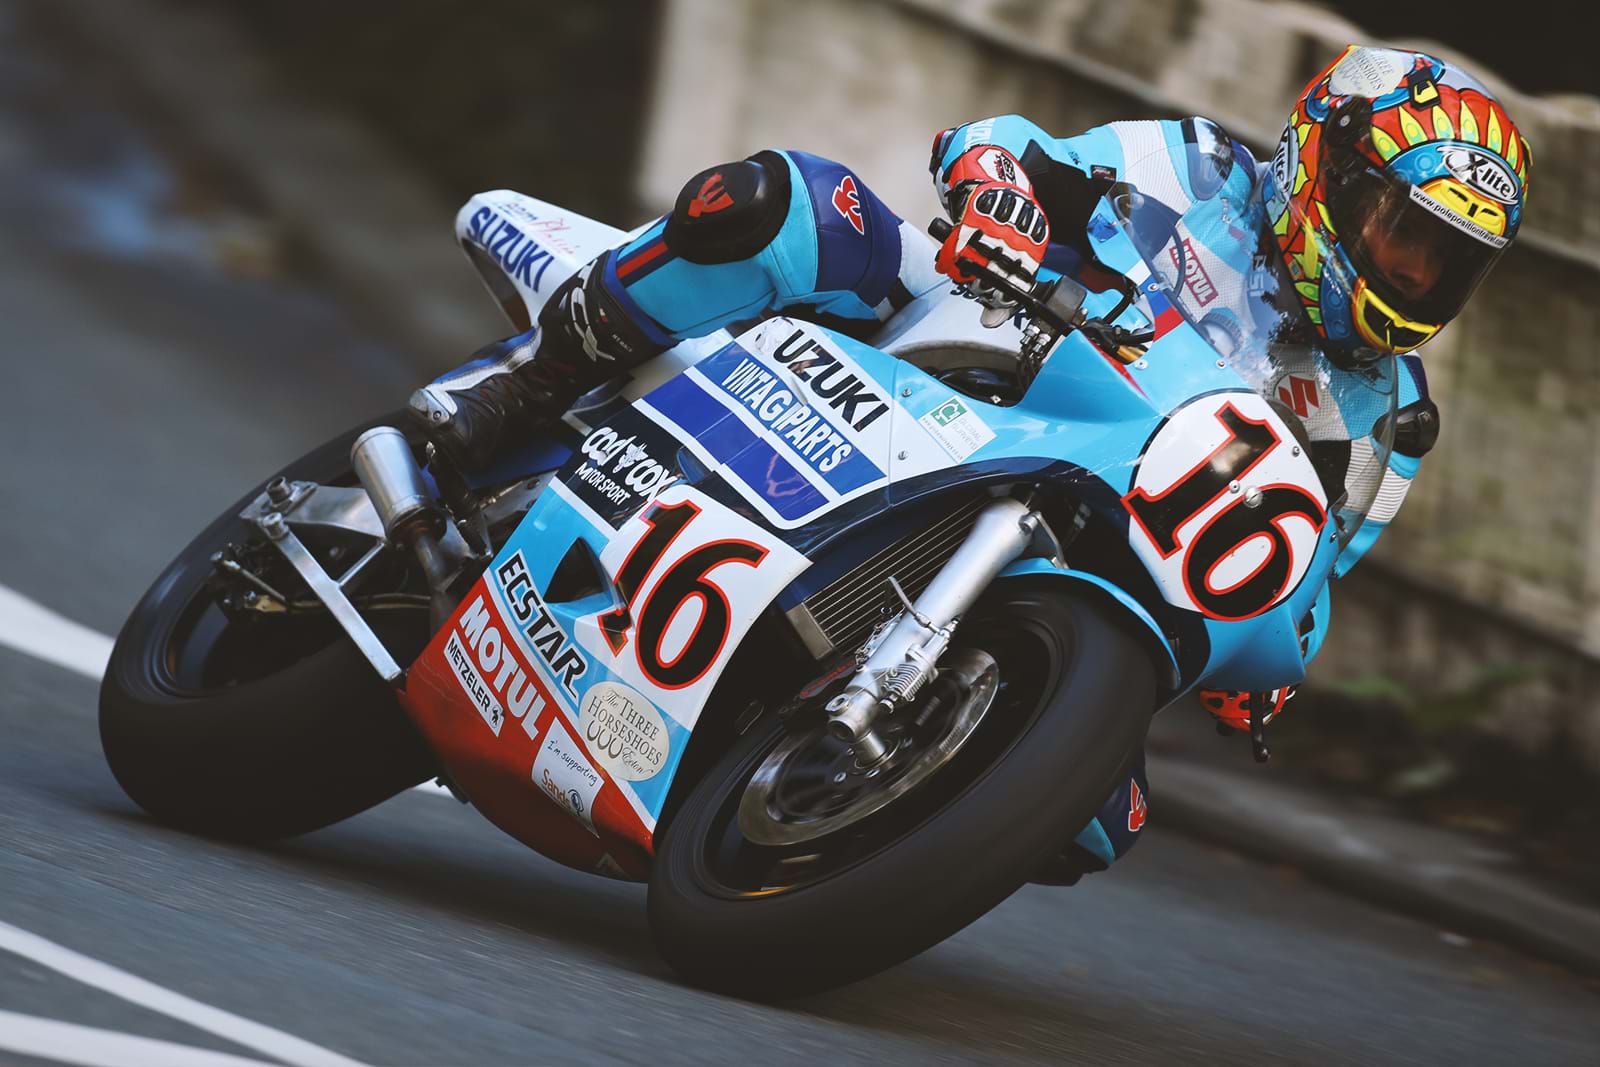 A side view of a racer astride the Suzuki RG500 GP Supersport race bike